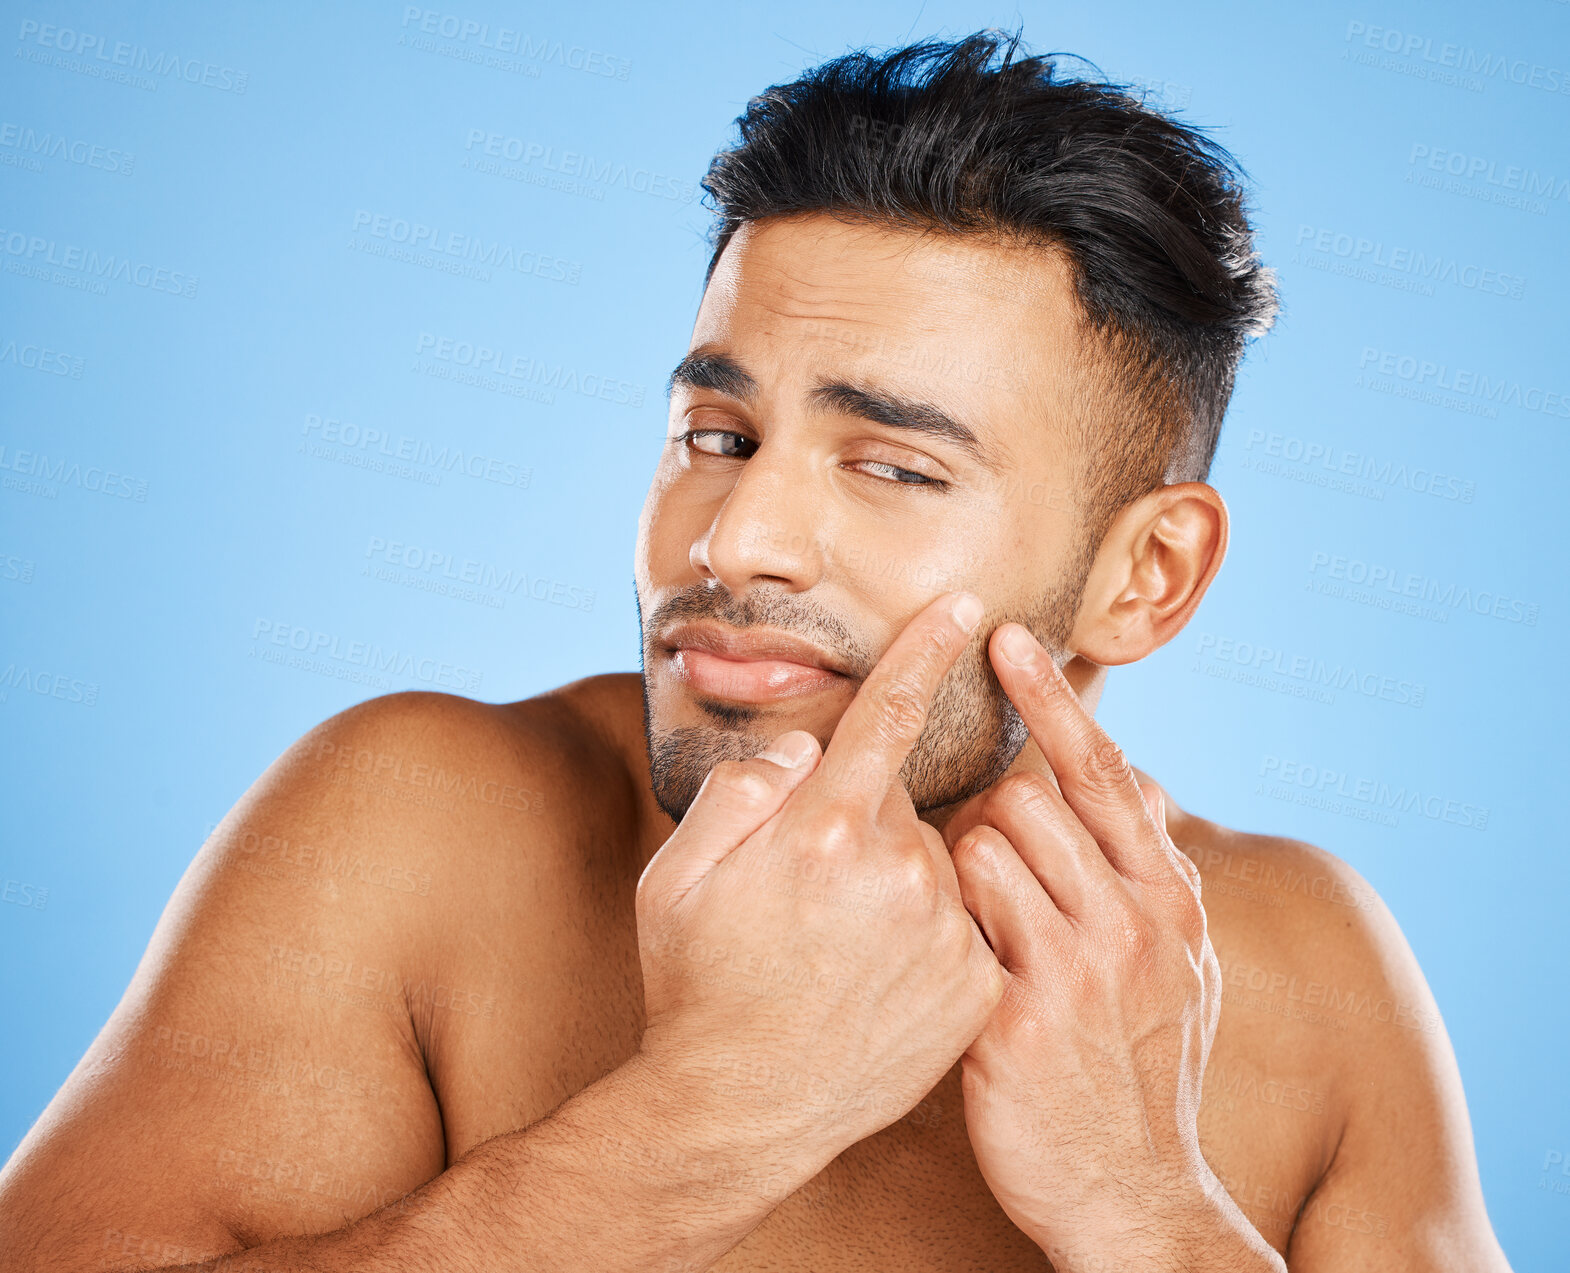 Buy stock photo Skincare, beauty and model check for acne breakout, pimple or facial scar after wellness, self care or healthcare treatment. Dermatology, cosmetology or aesthetic man with spa routine for skin health